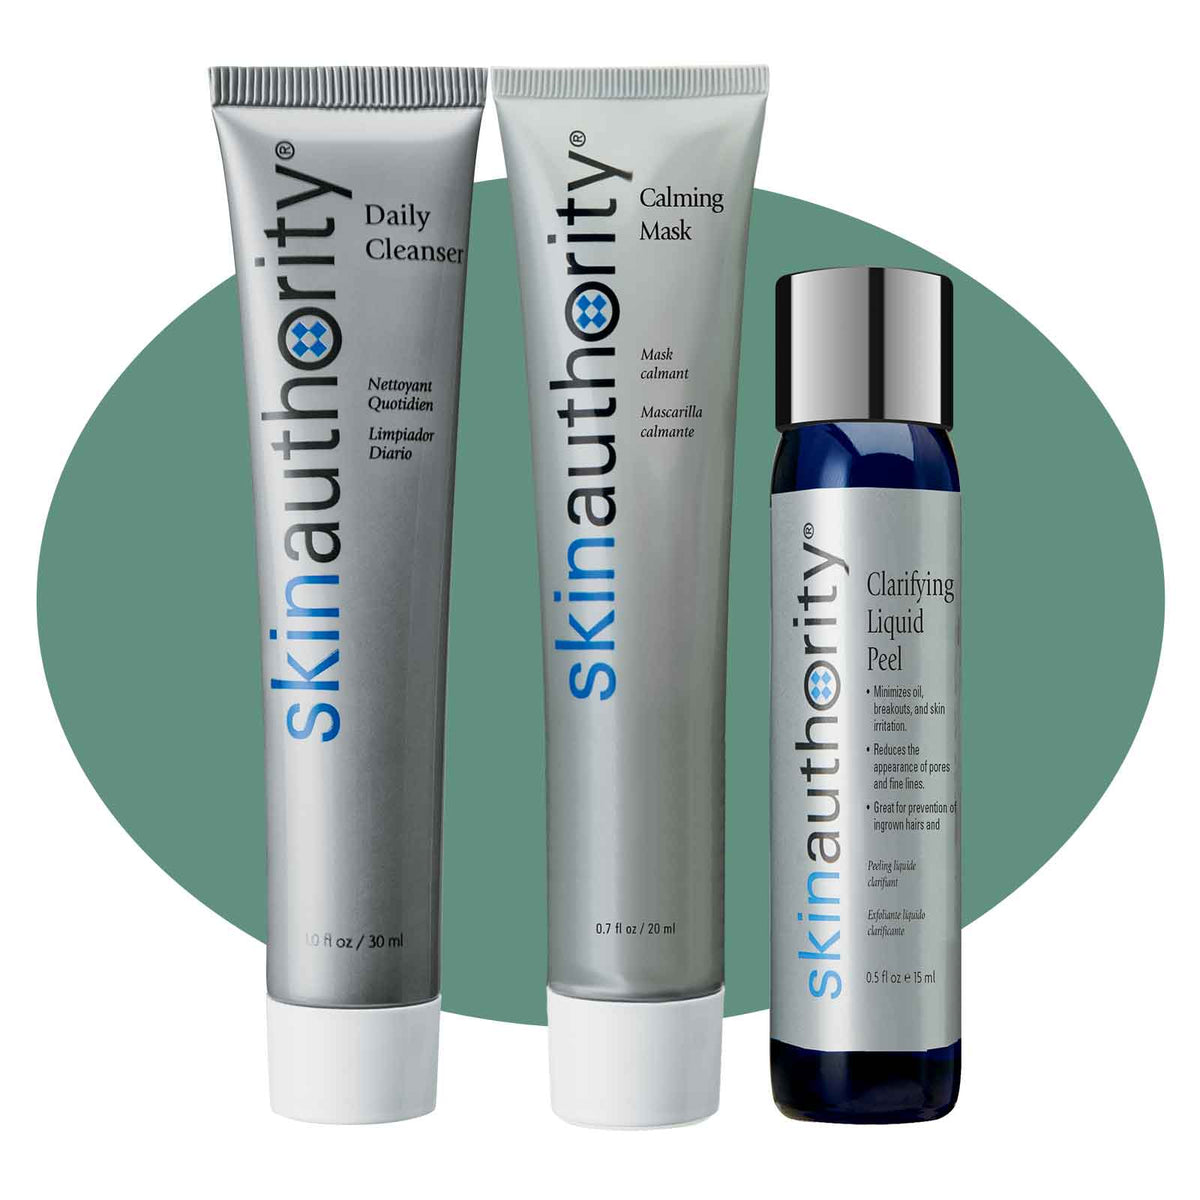 QuickPick daily routine for clarifying by Skin Authority.